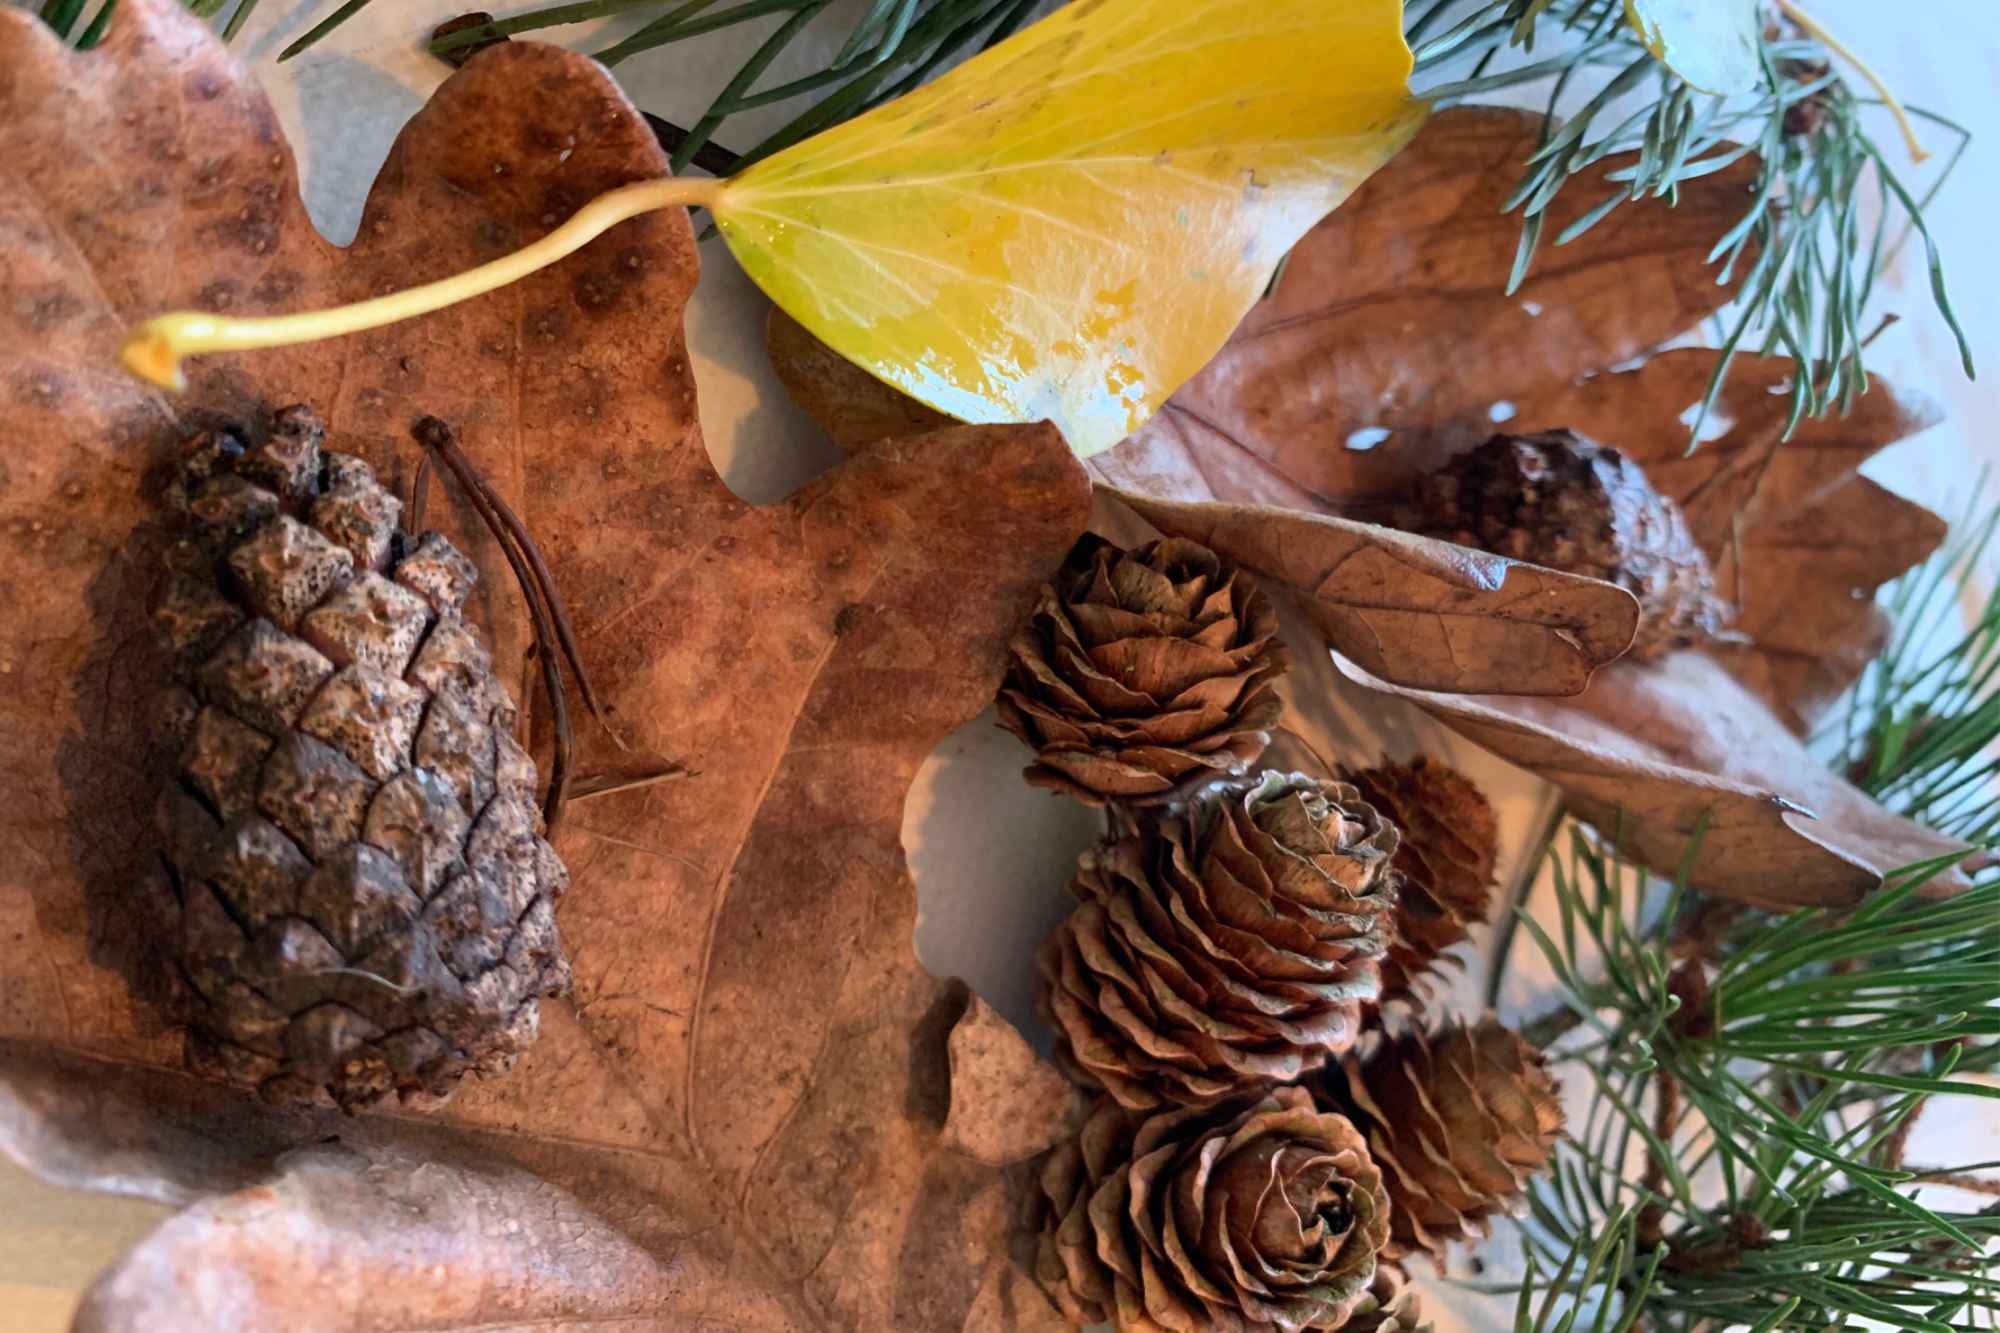 Nature art made out of pinecones and leaves